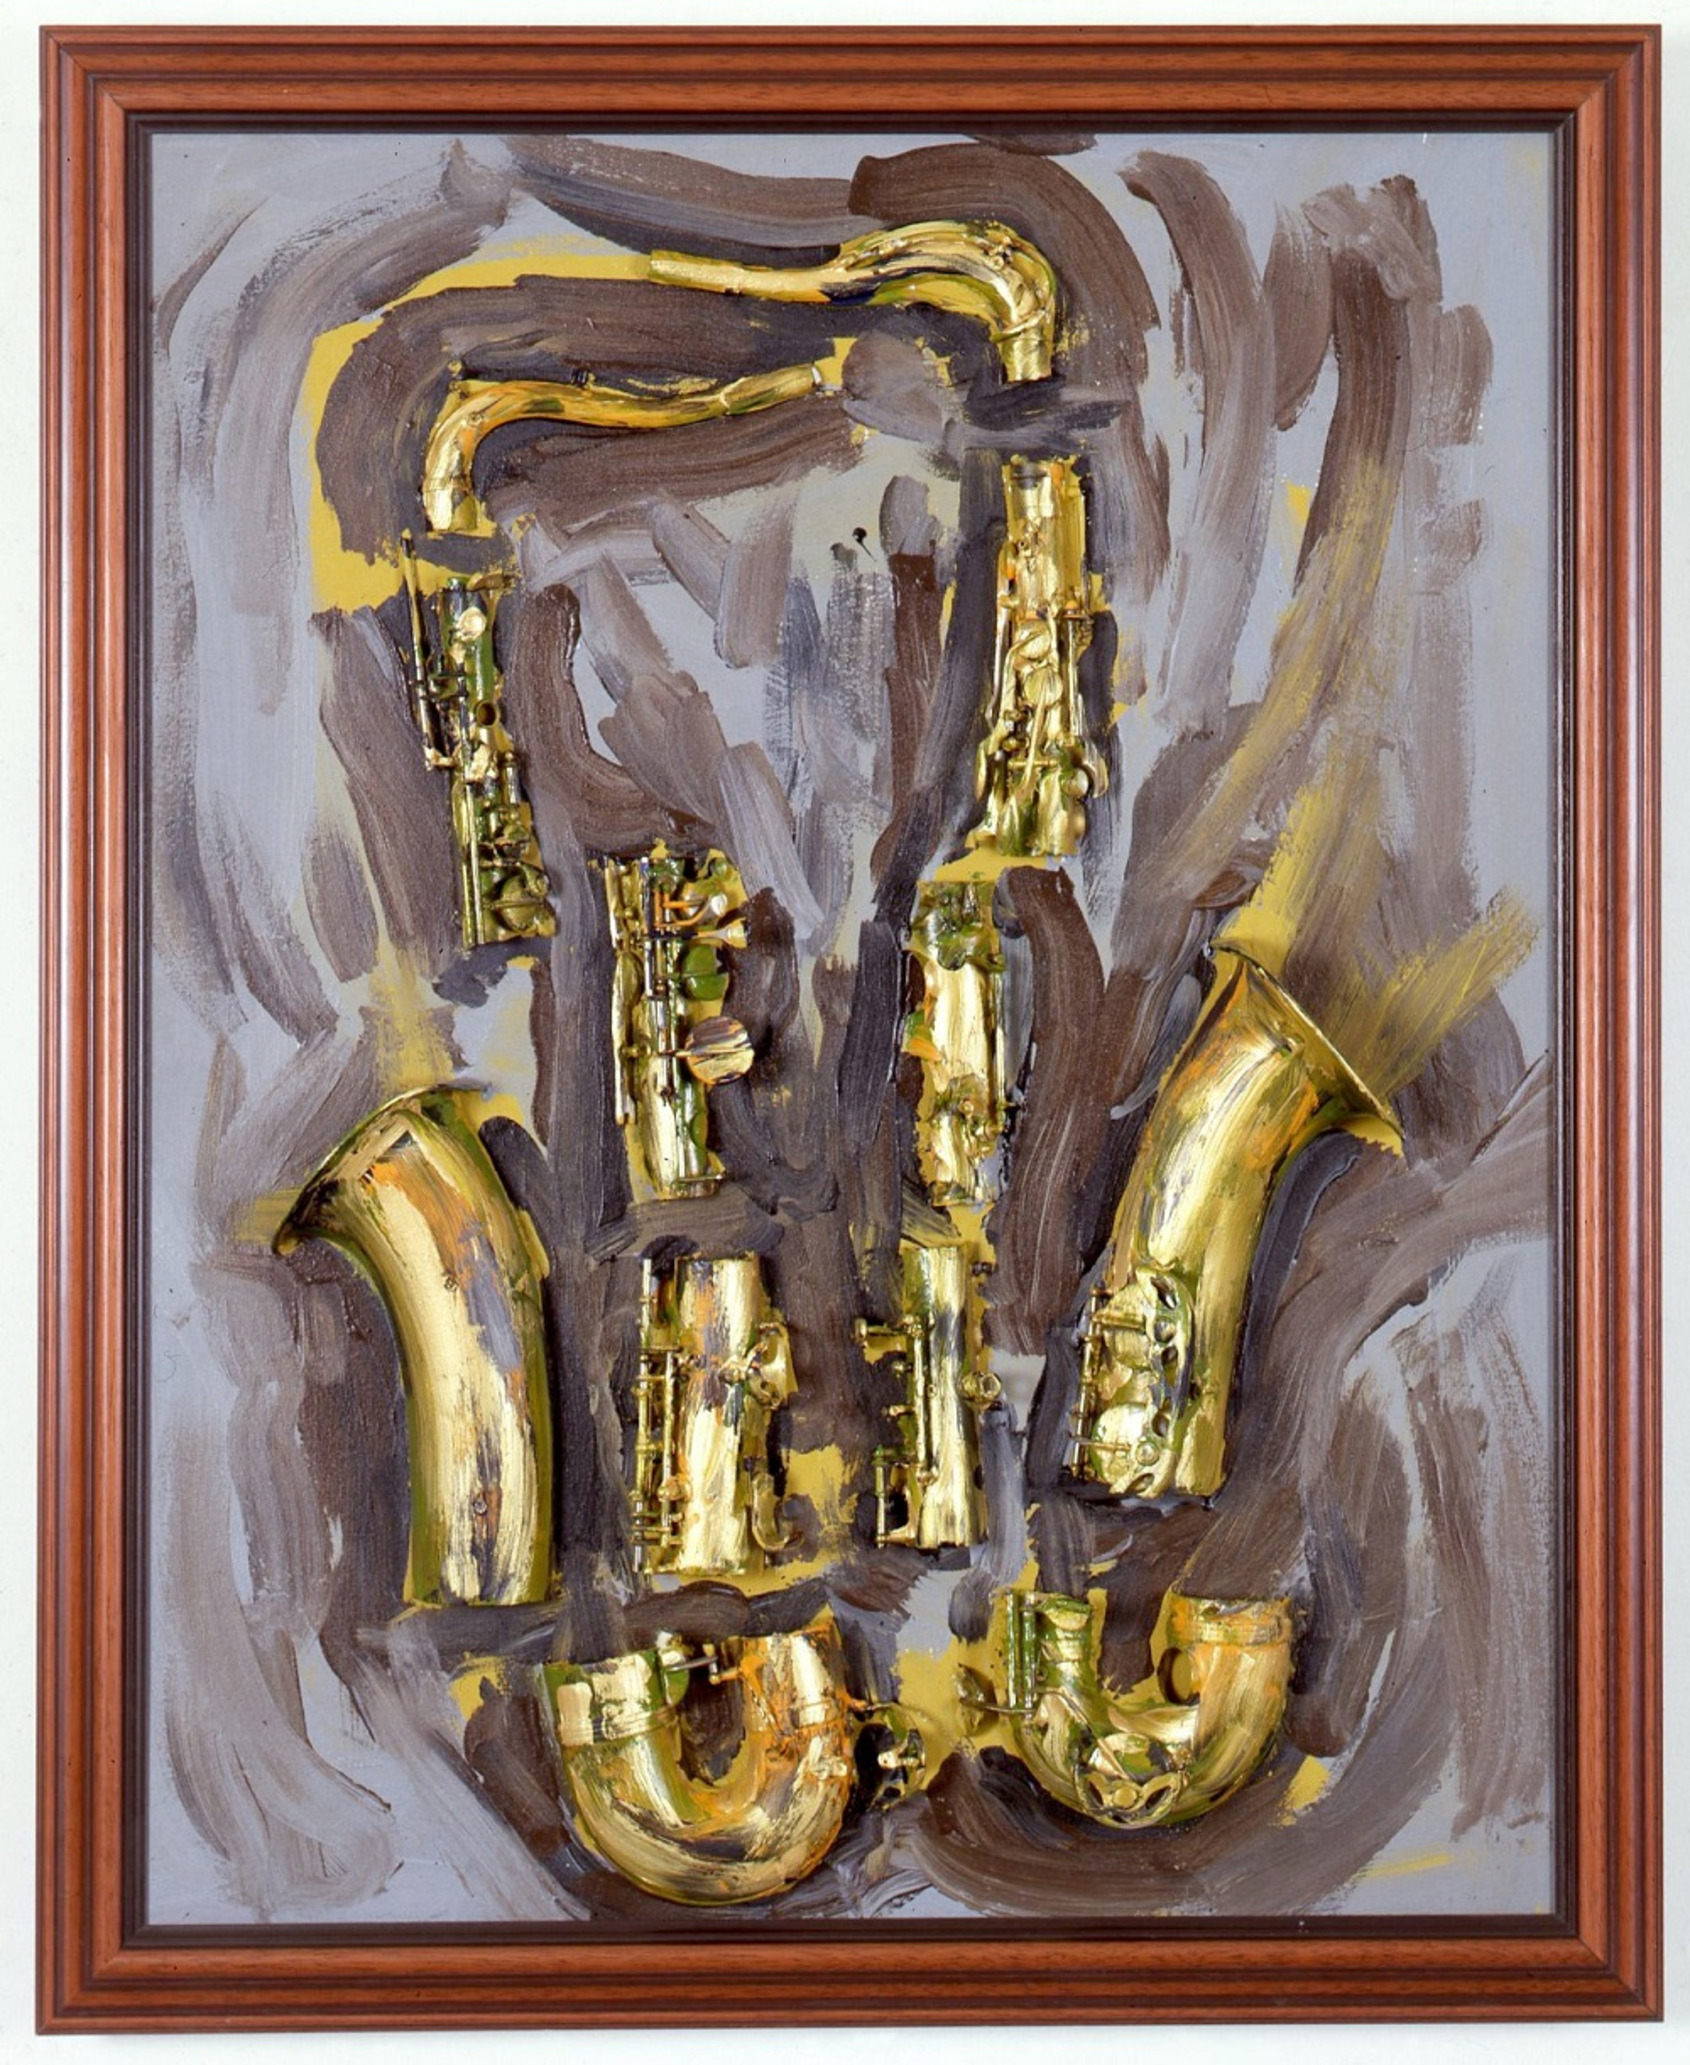 Untitled, Arman, 2002, 81.3 x 101.6 cm.Sliced saxophone with acrylic paint on canvas. Colors: black, burnt umber, yellow ochre, orange, green, gray. Courtesy of The Arman Marital Trust. 